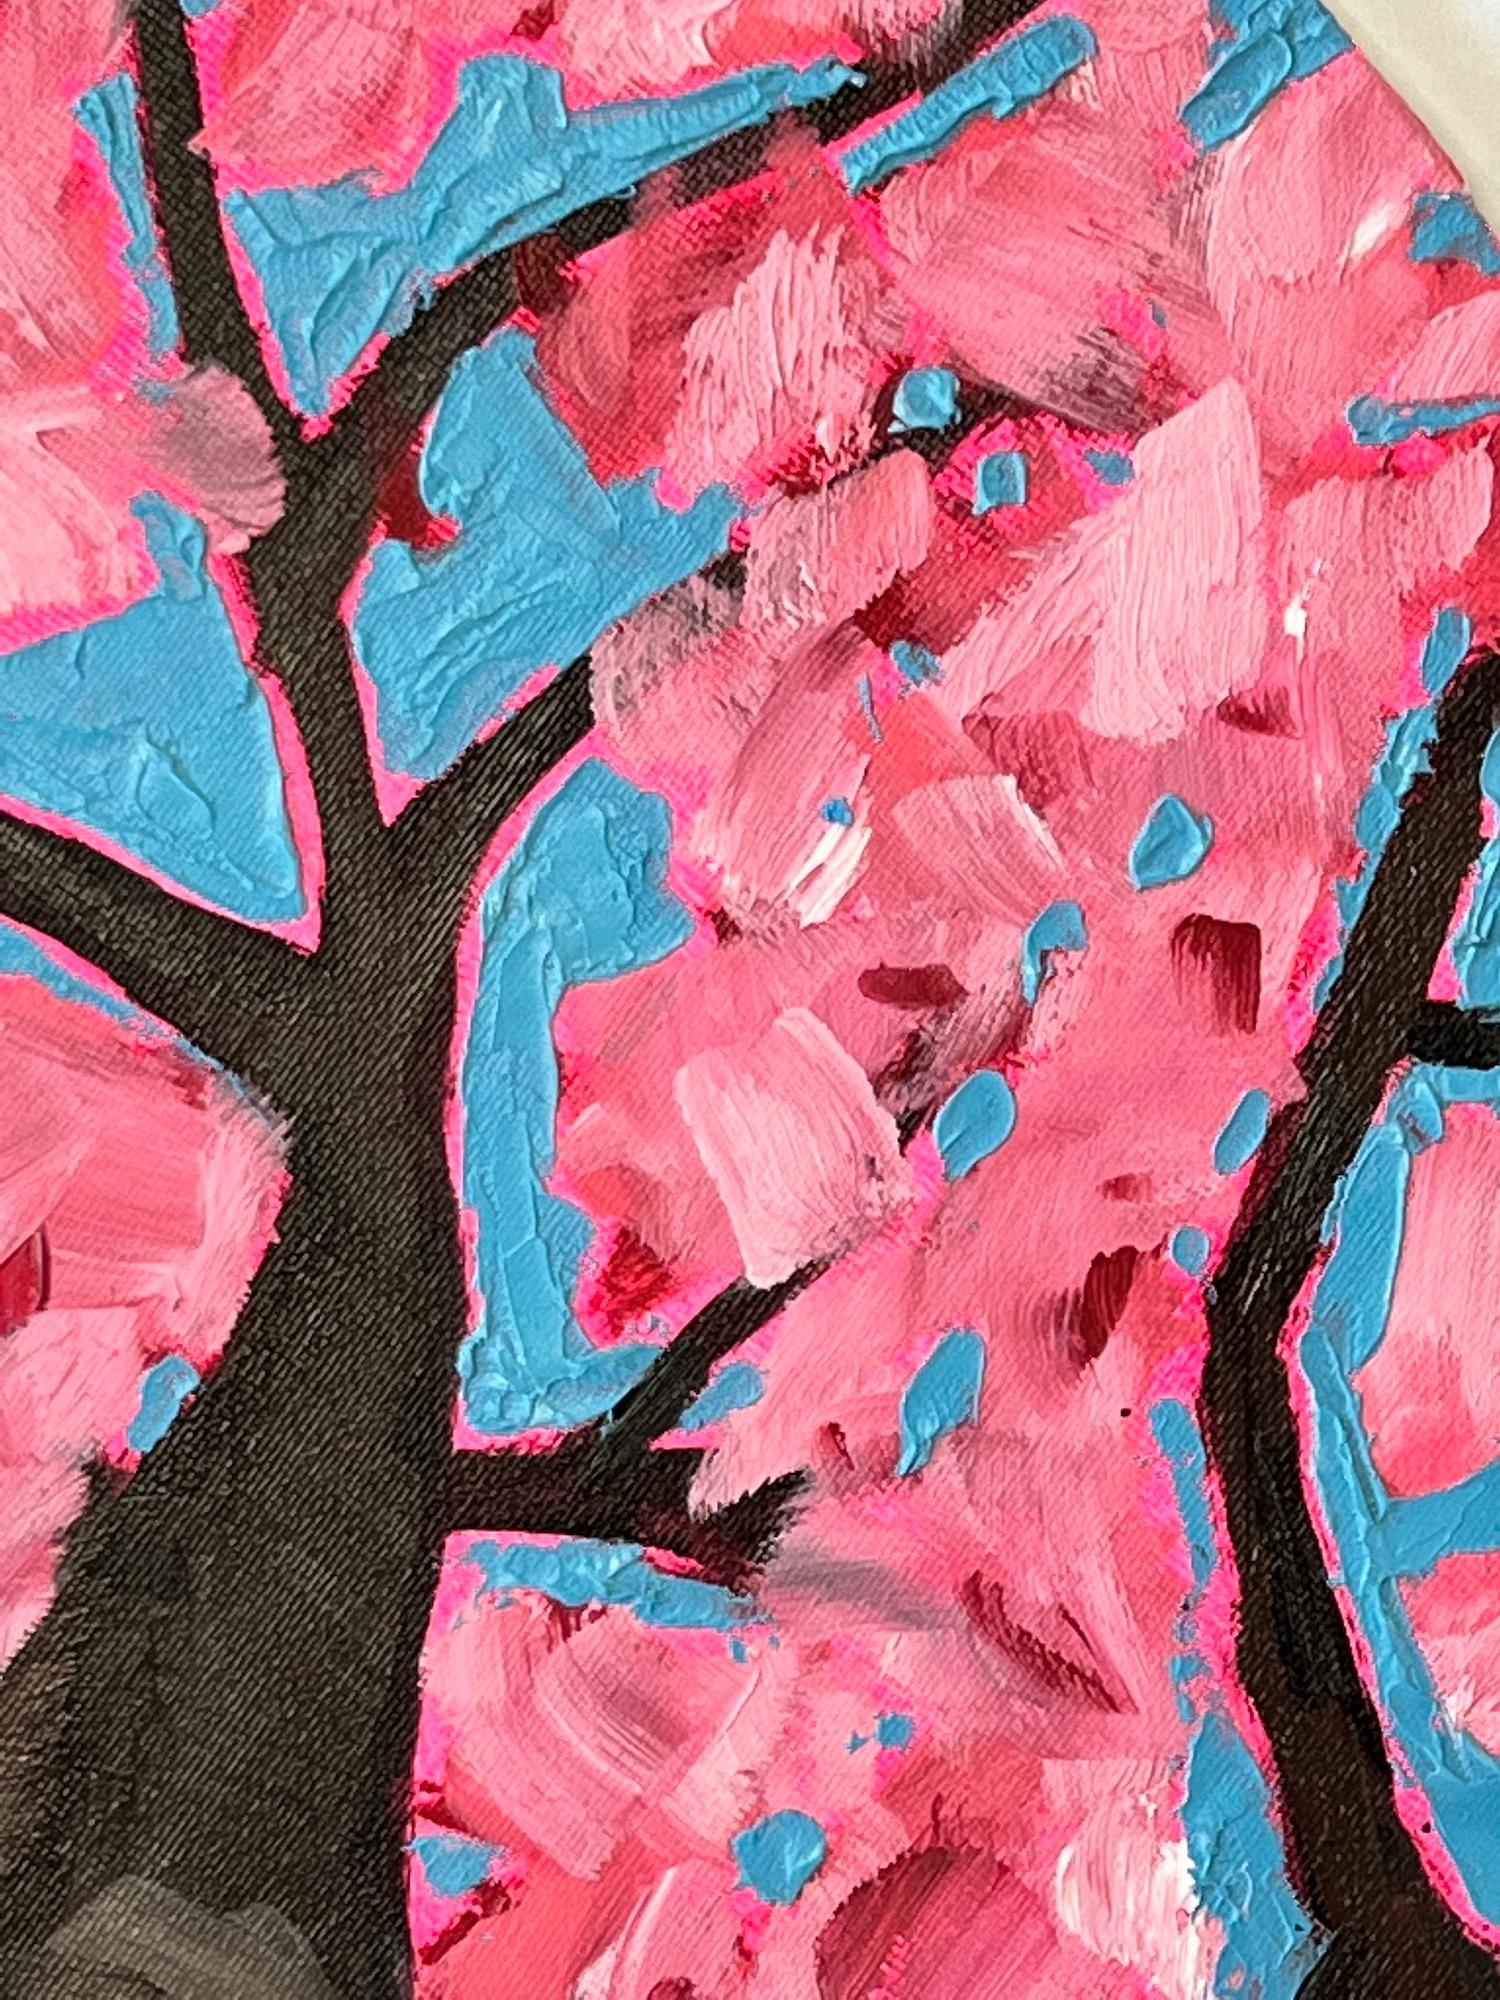 Emily Finch, Looking Up through Cherry Blossom to Reflect, Mental Health Art For Sale 3